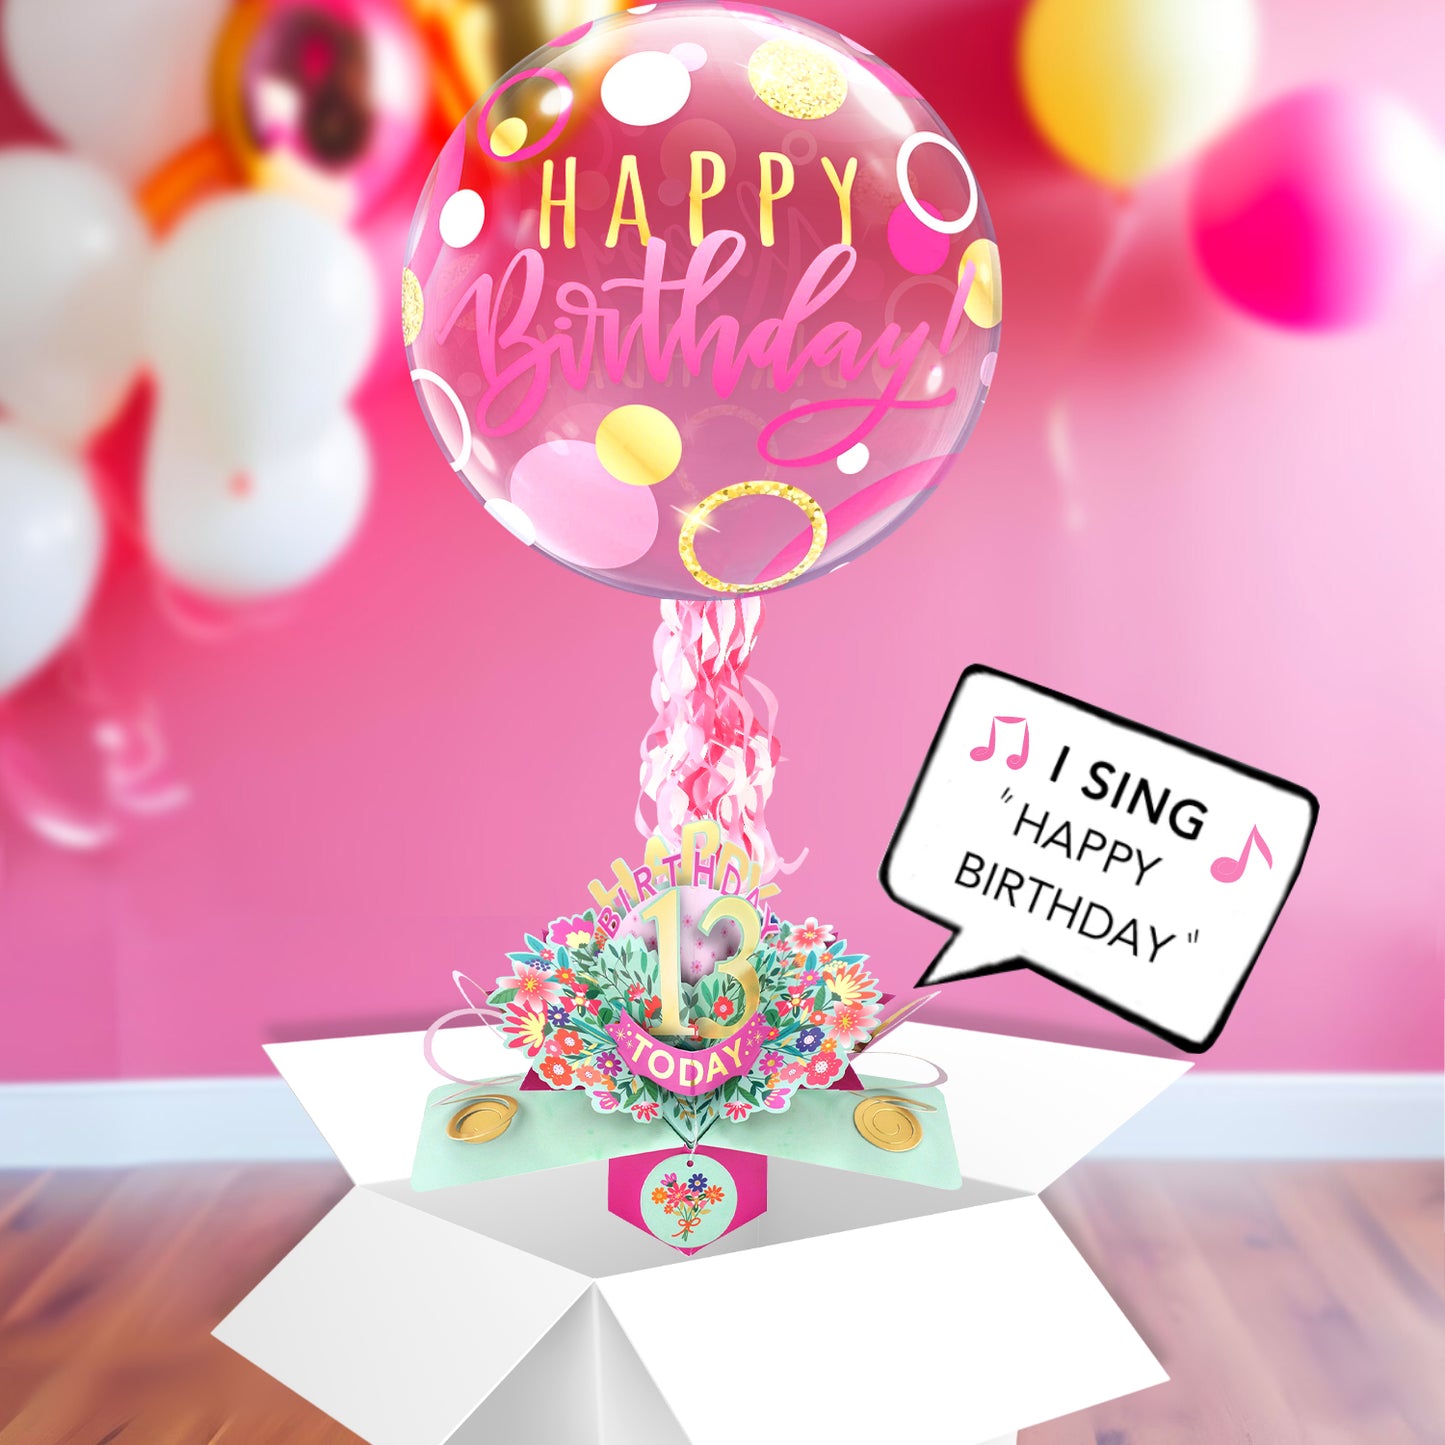 13th Birthday Pop Up Card & Musical Balloon Surprise Delivered In A Box For Her